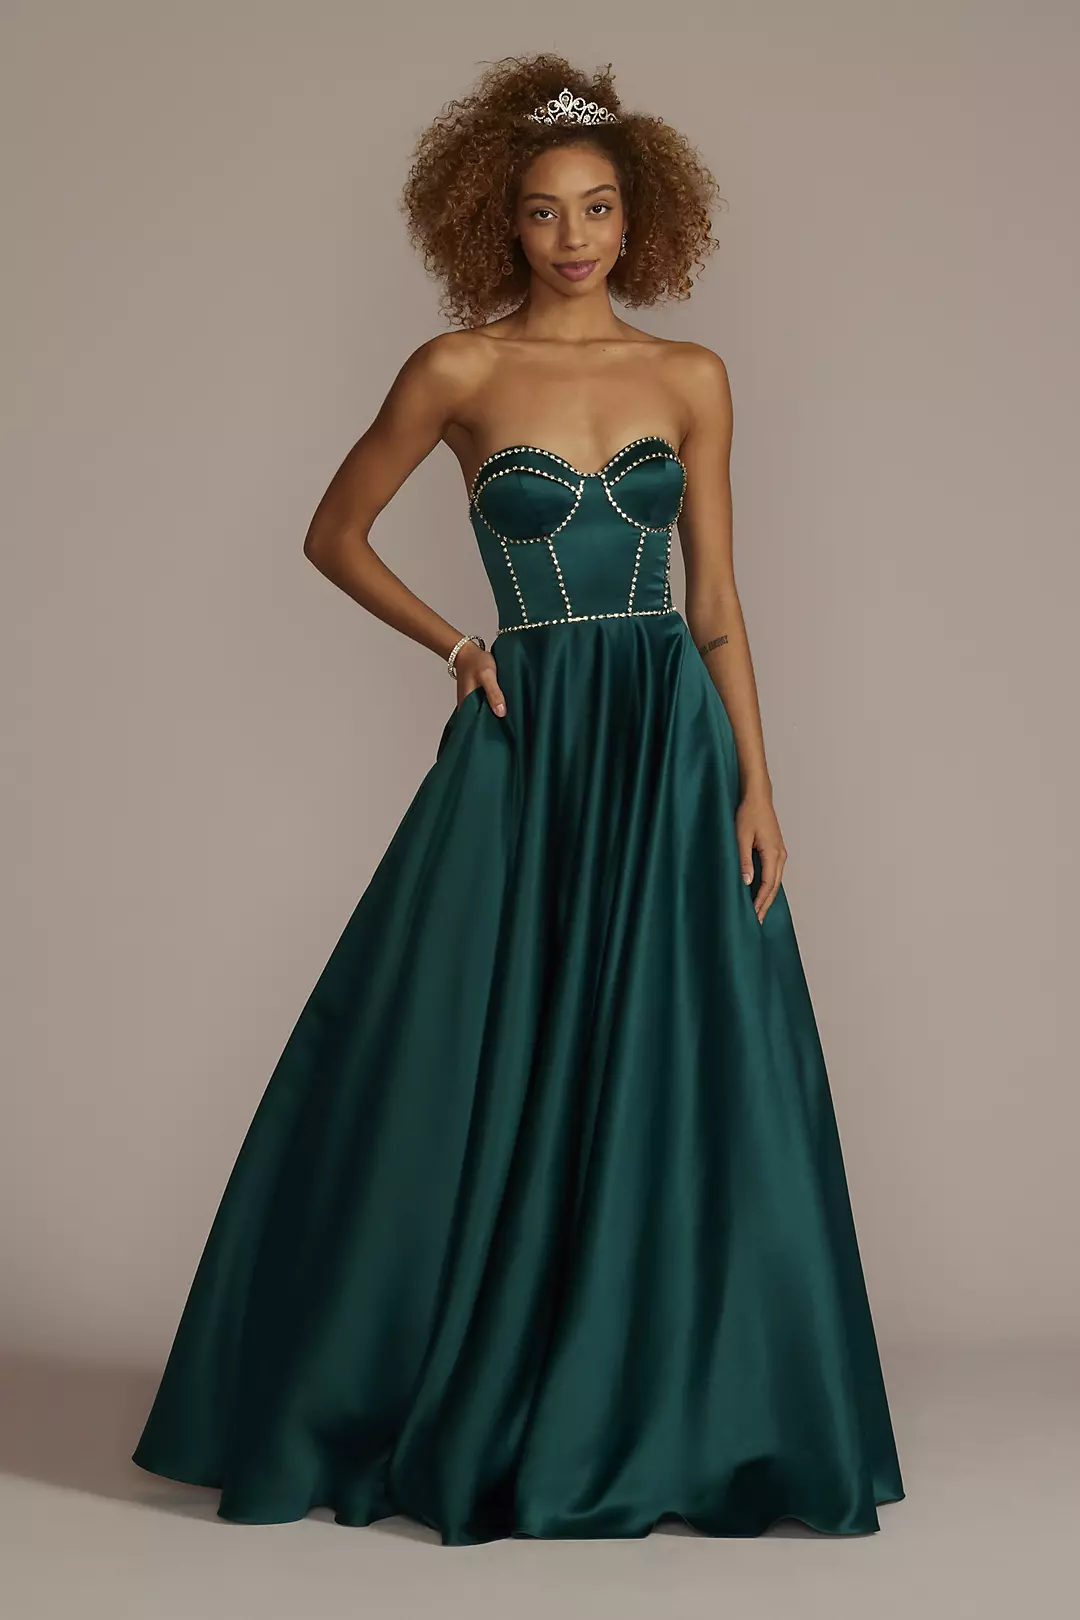 Satin Ball Gown with Jewel Embellished Bodice Image